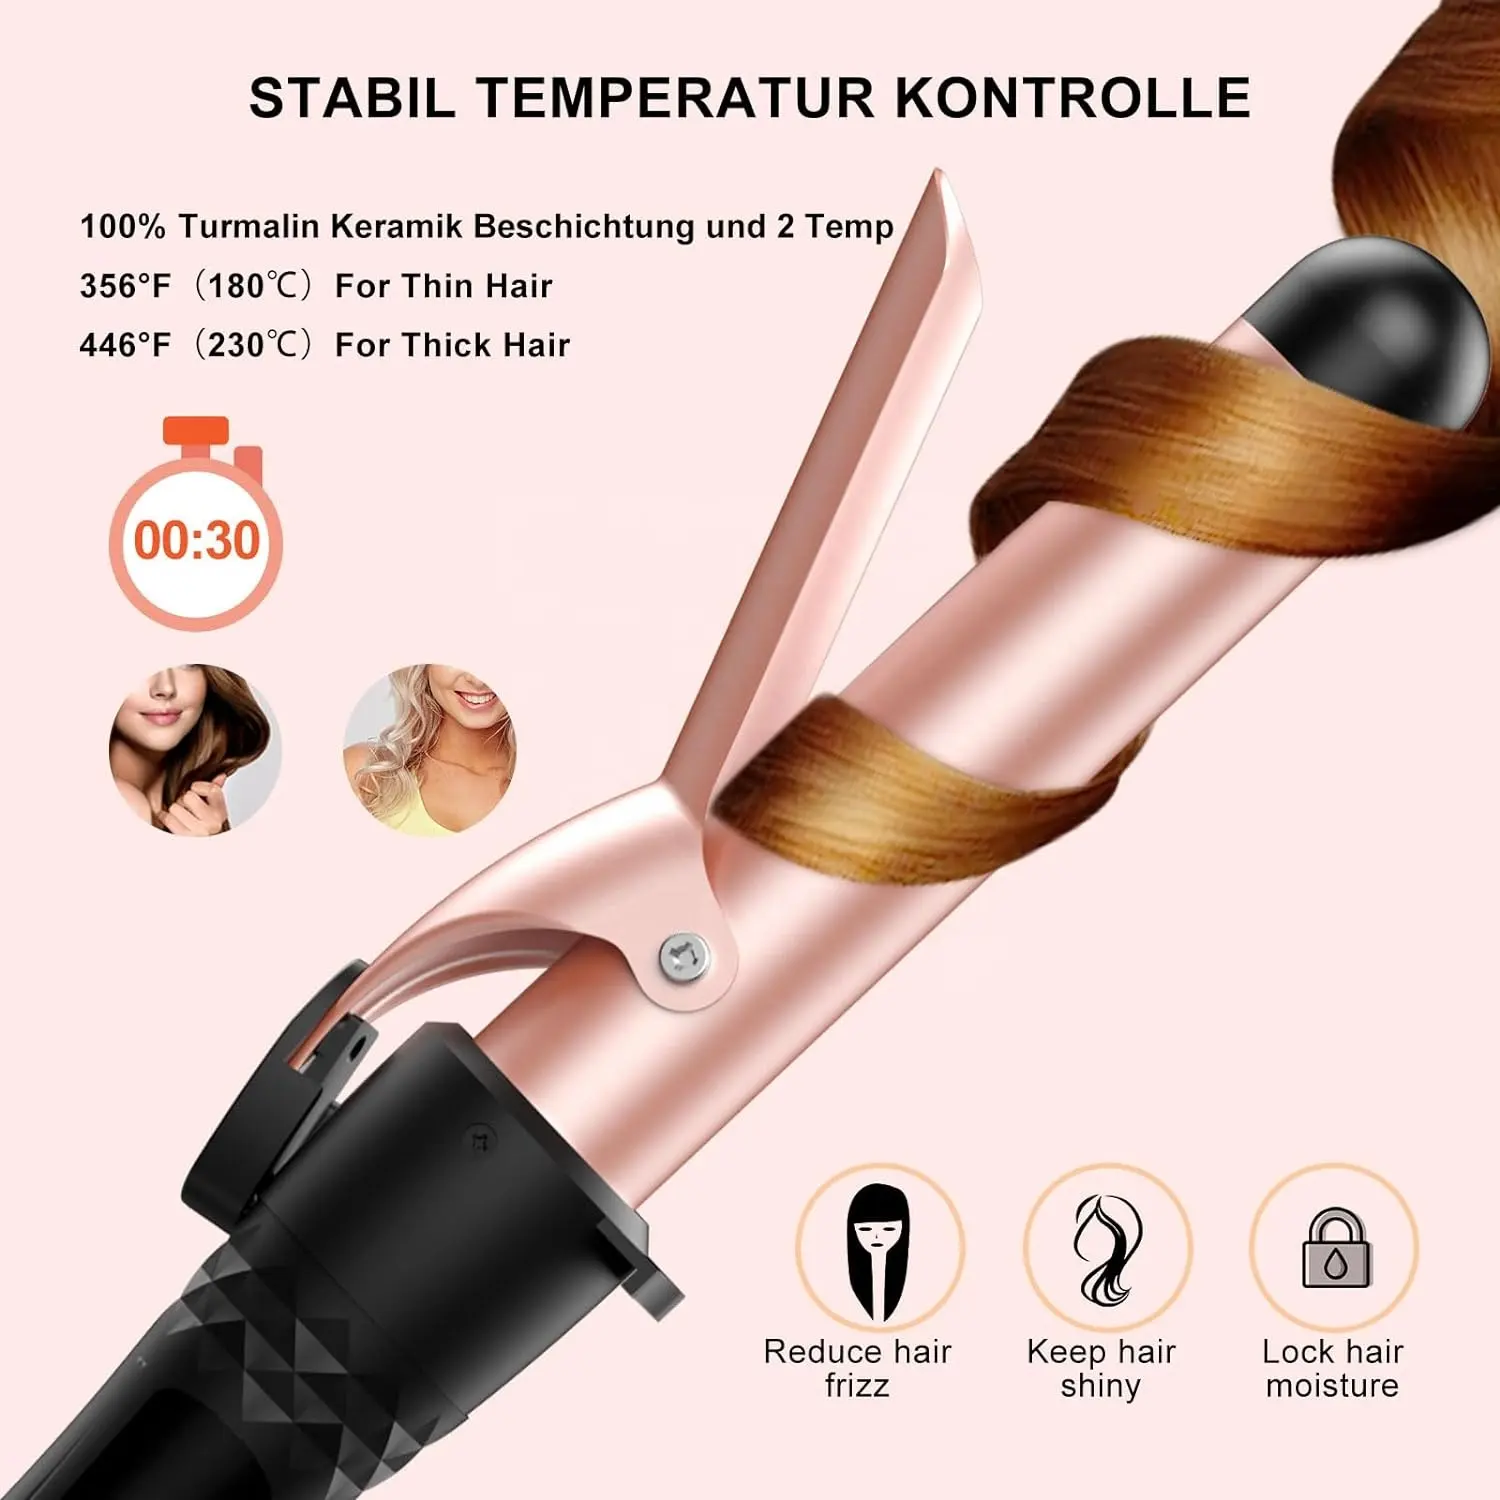 Curling Iron Set 5 in 1  Curling Iron with 3 Barrels and Multifunctional Curling Brush